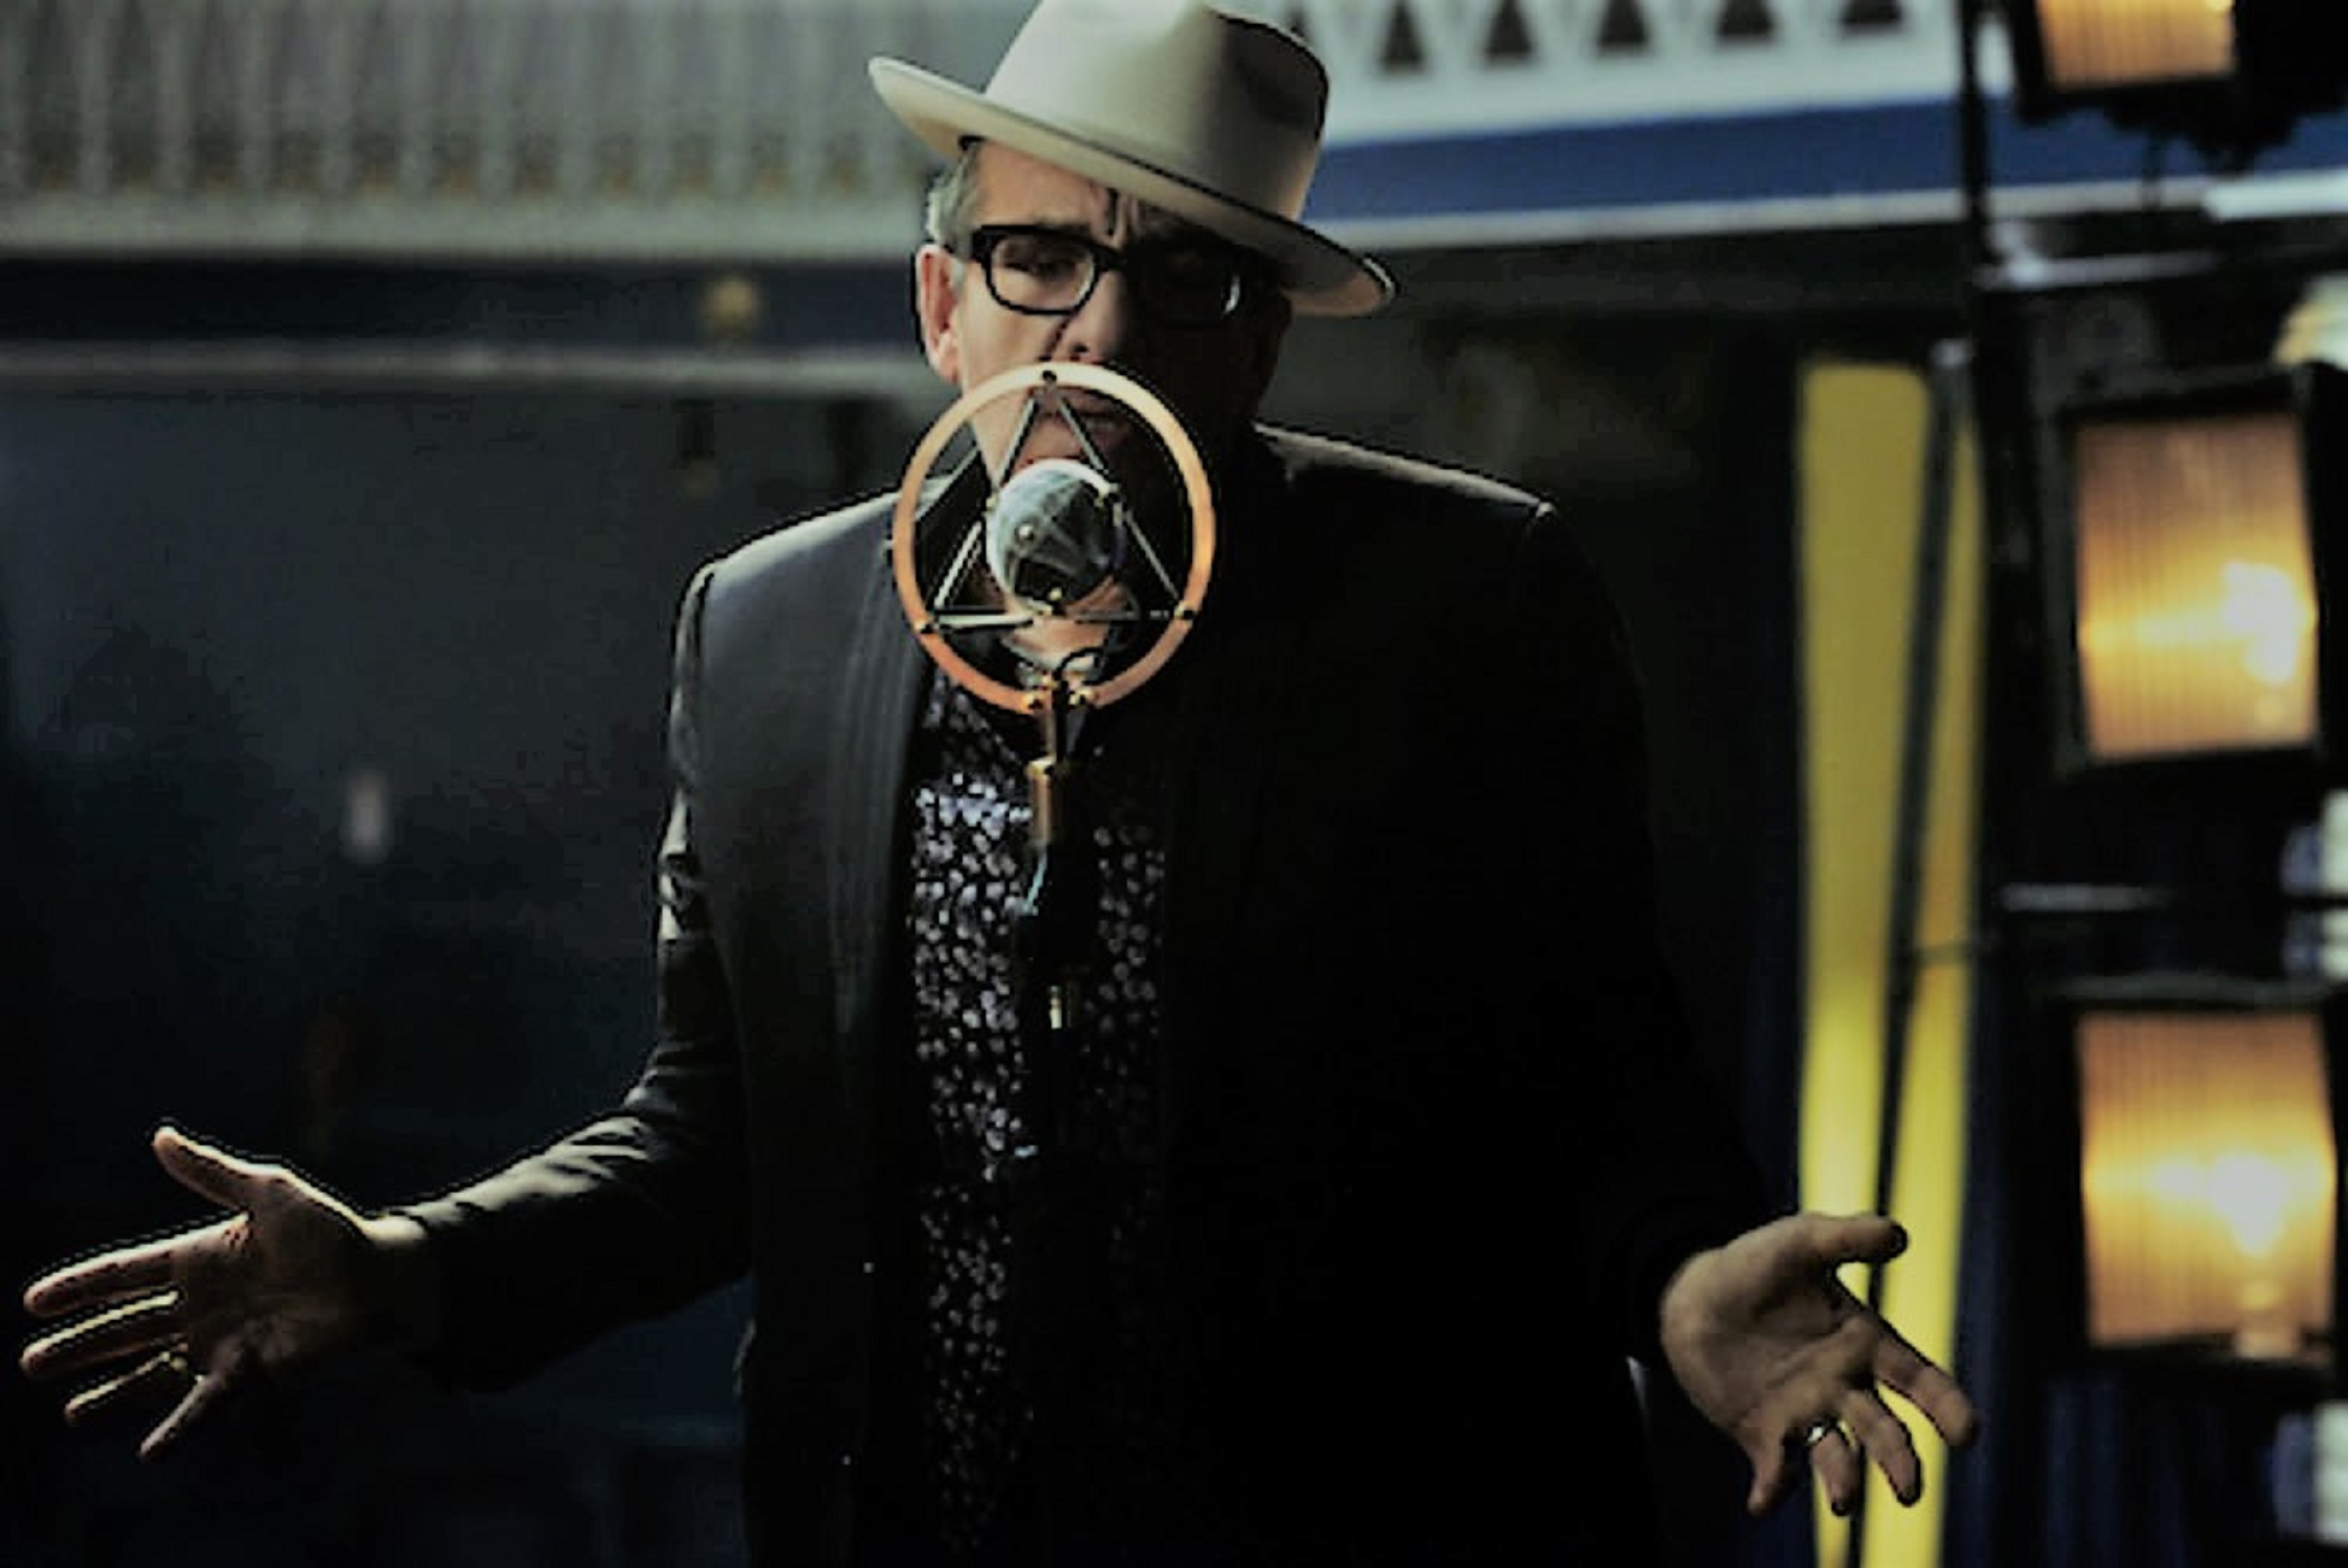 Elvis Costello Releases Video for New Single "You Shouldn't Look At Me That Way"